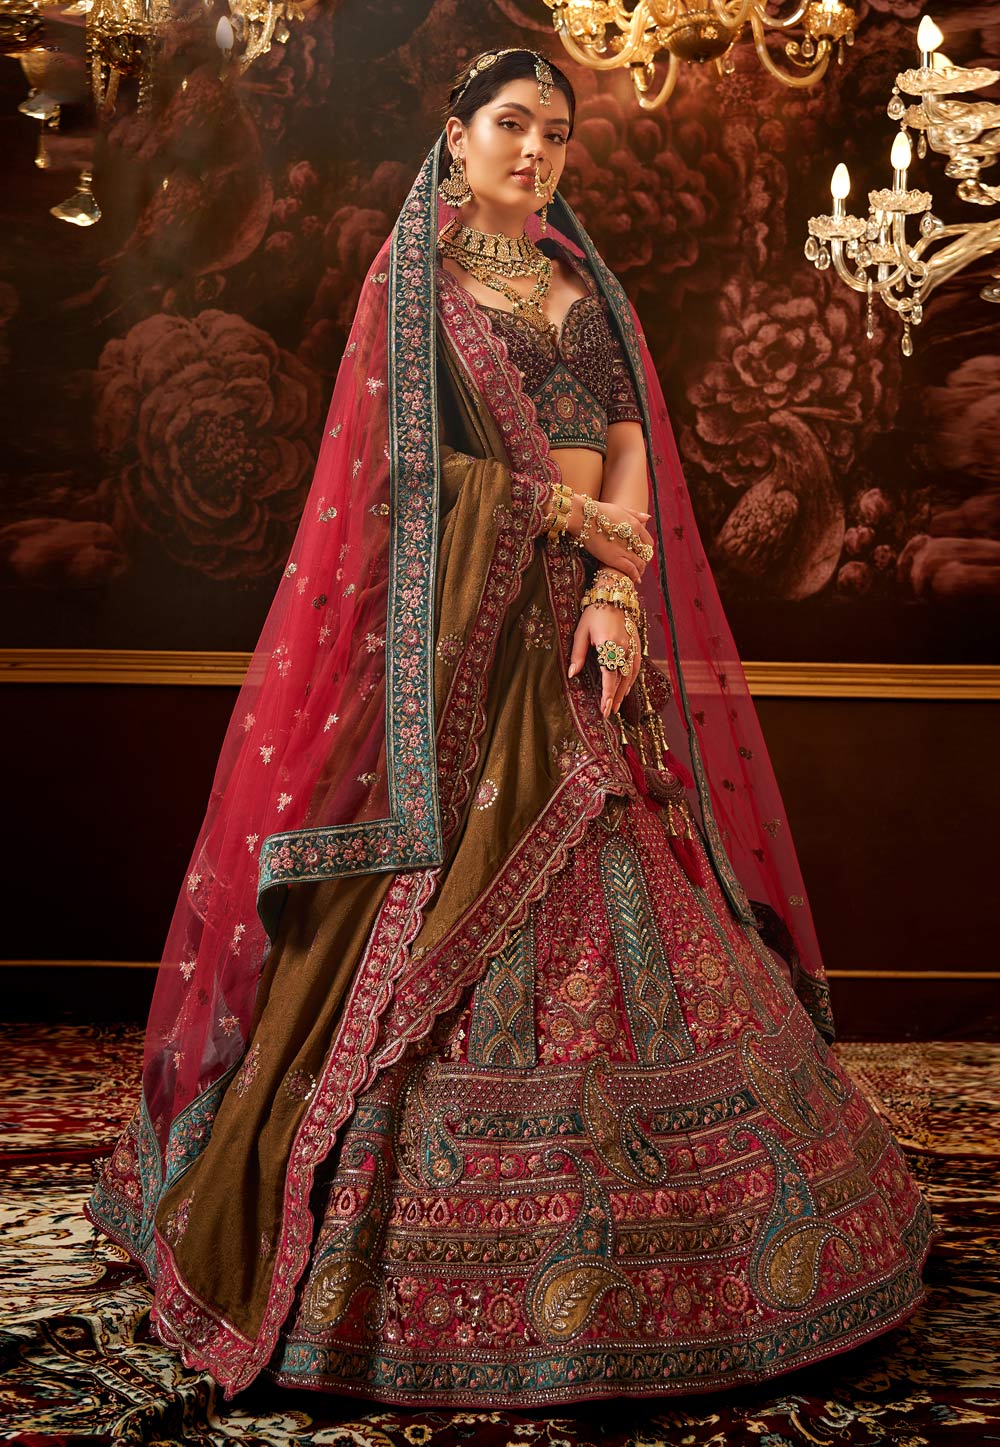 8 New Bridal Lehenga Tips To Keep It New Before You Don It On Your Big Day